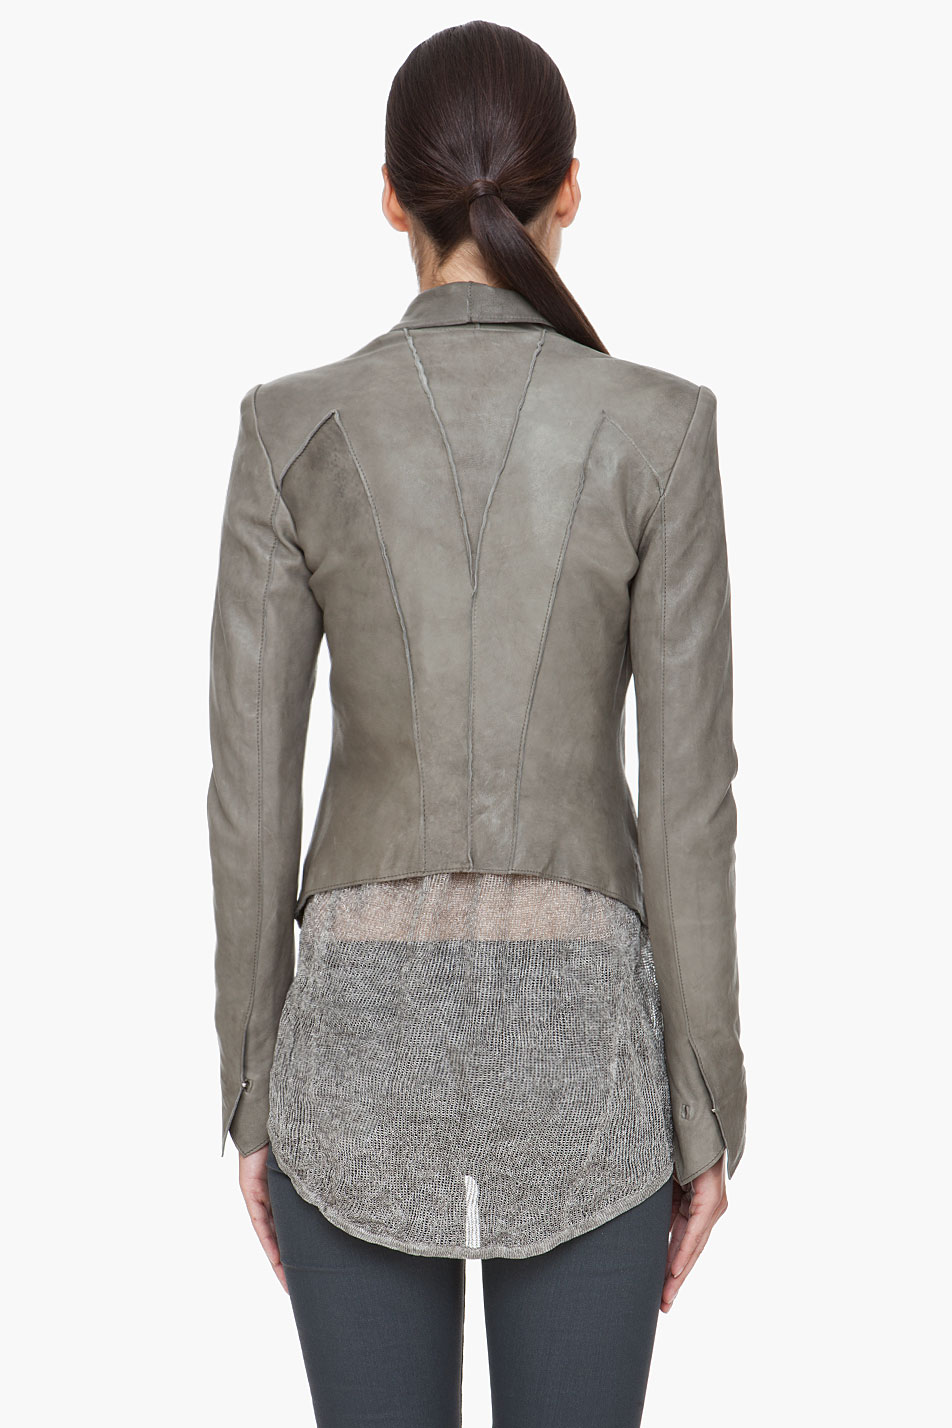 Helmut Lang Grey Leather Jacket in Gray - Lyst